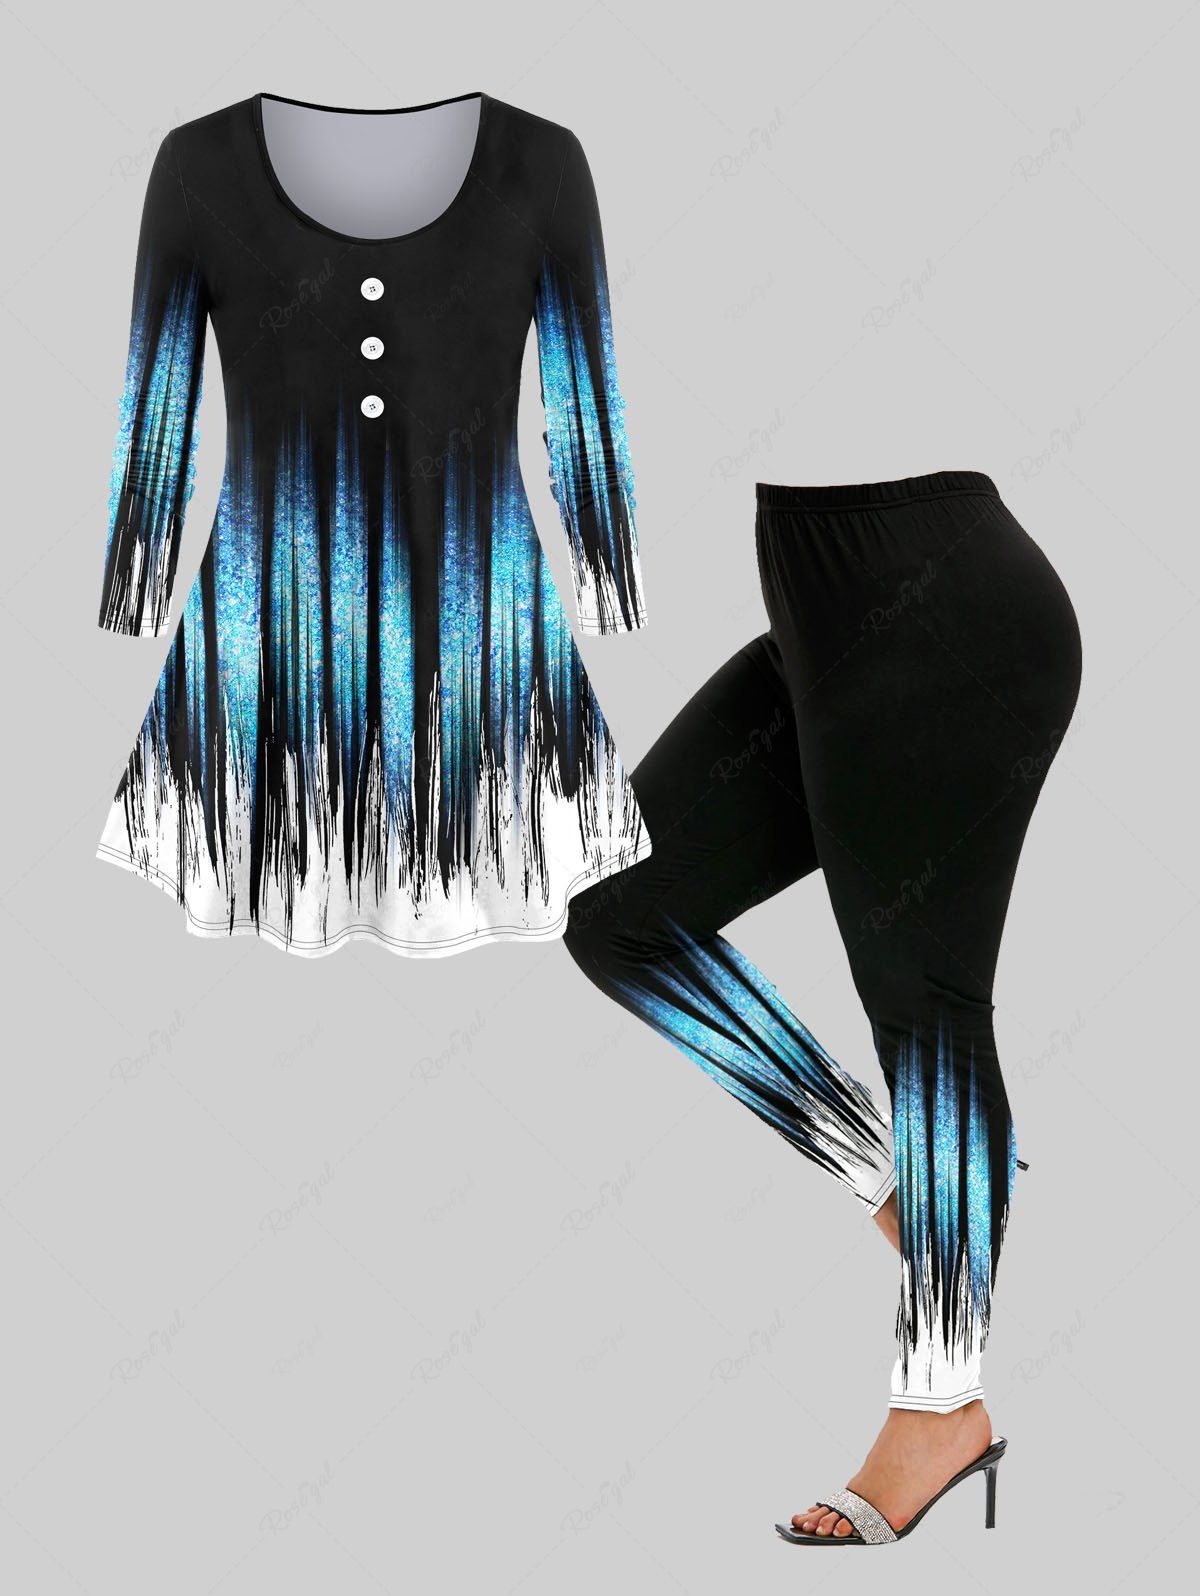 Sale Light Beam Print T-shirt and High Waist Leggings Plus Size Outfit  